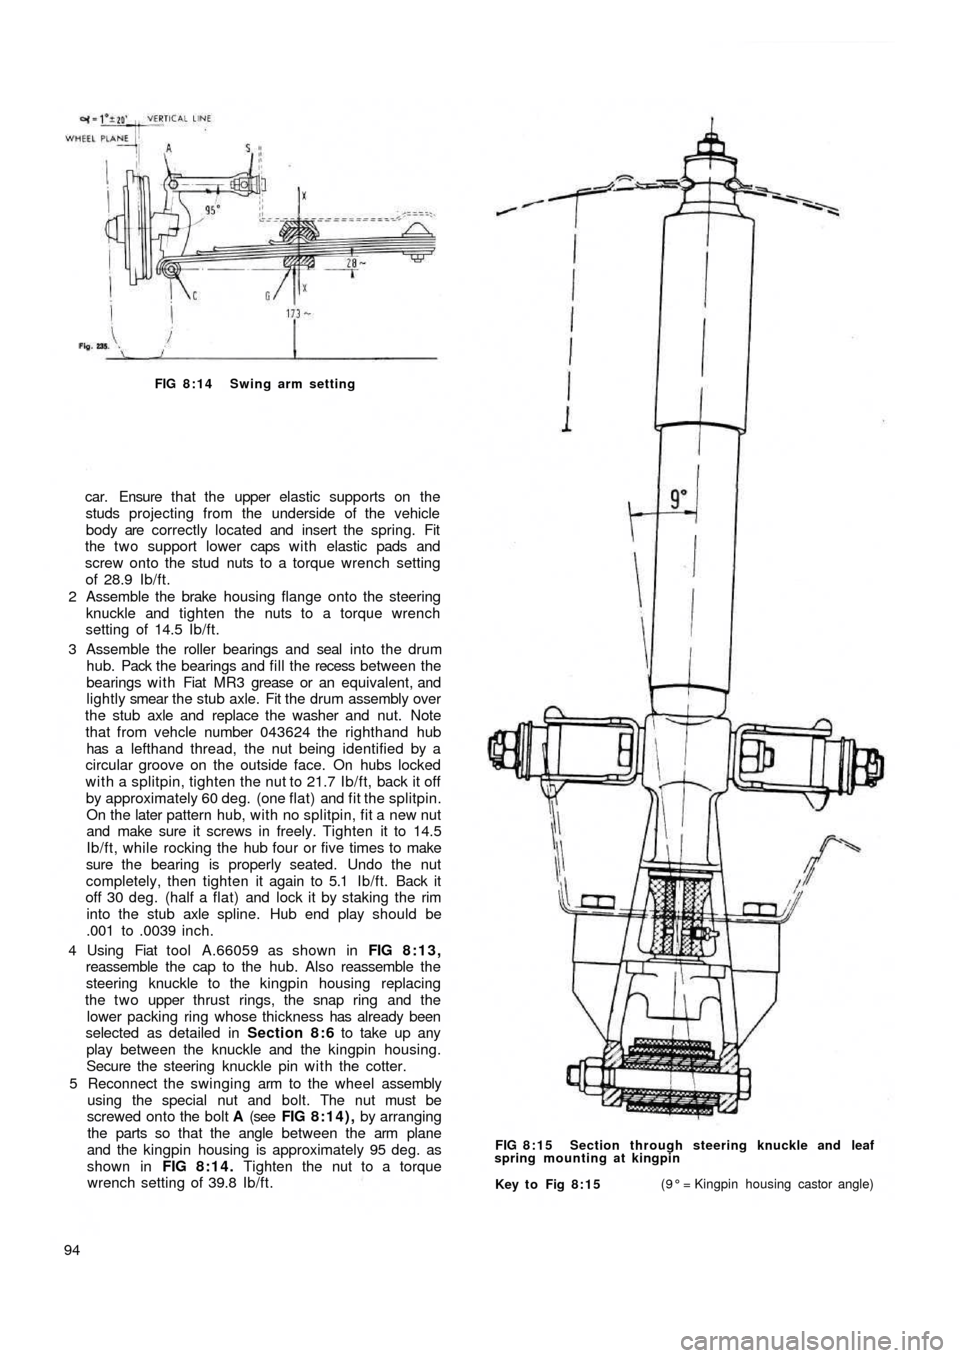 FIAT 500 1966 1.G Workshop Manual FIG 8:14 Swing arm setting
car. Ensure t h a t the  upper elastic supports on the
studs projecting from the underside of the vehicle
body are correctly located and insert the spring. Fit
the two suppo